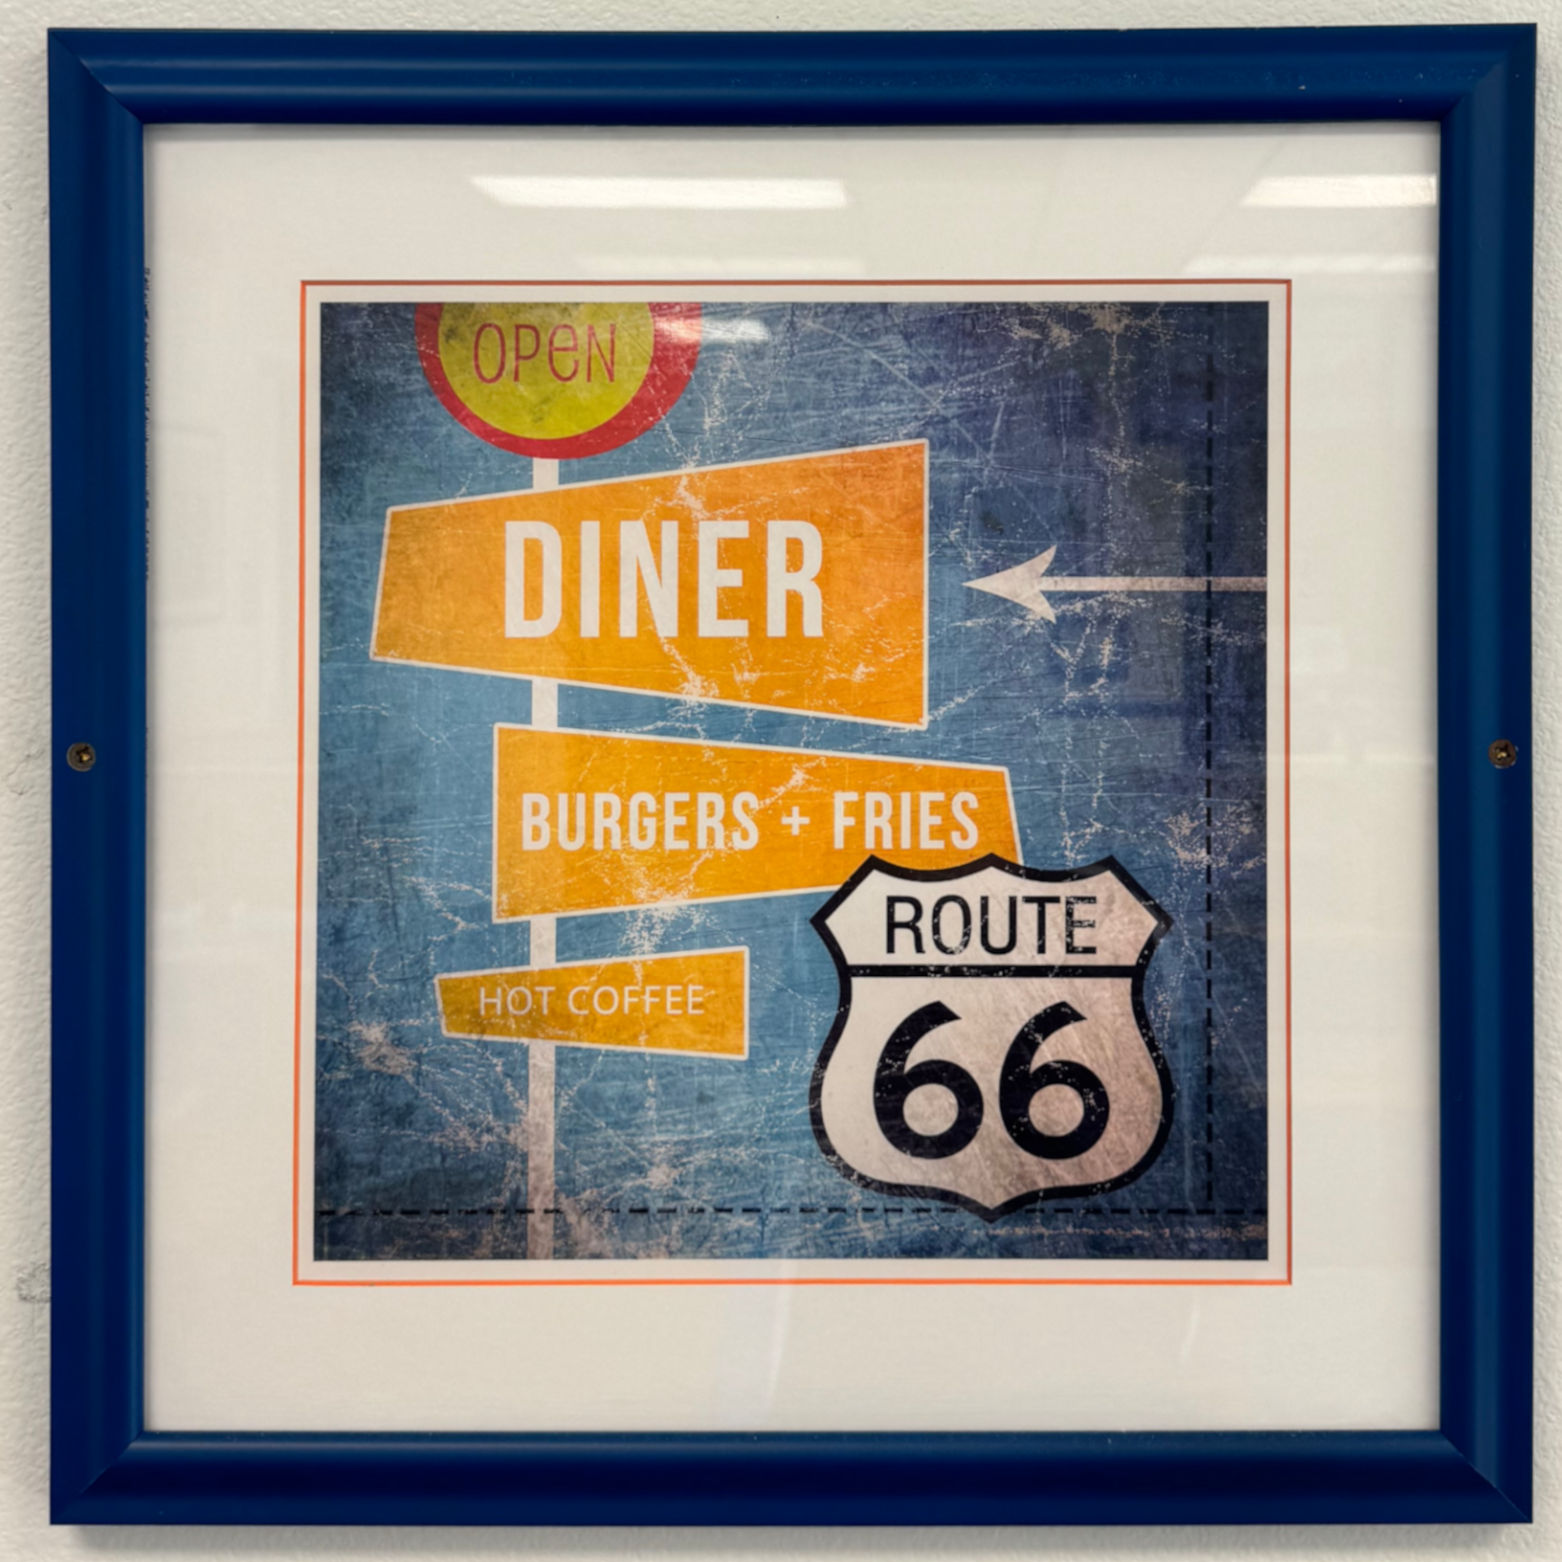 Baker's Drive-Thru Route 66 Diner